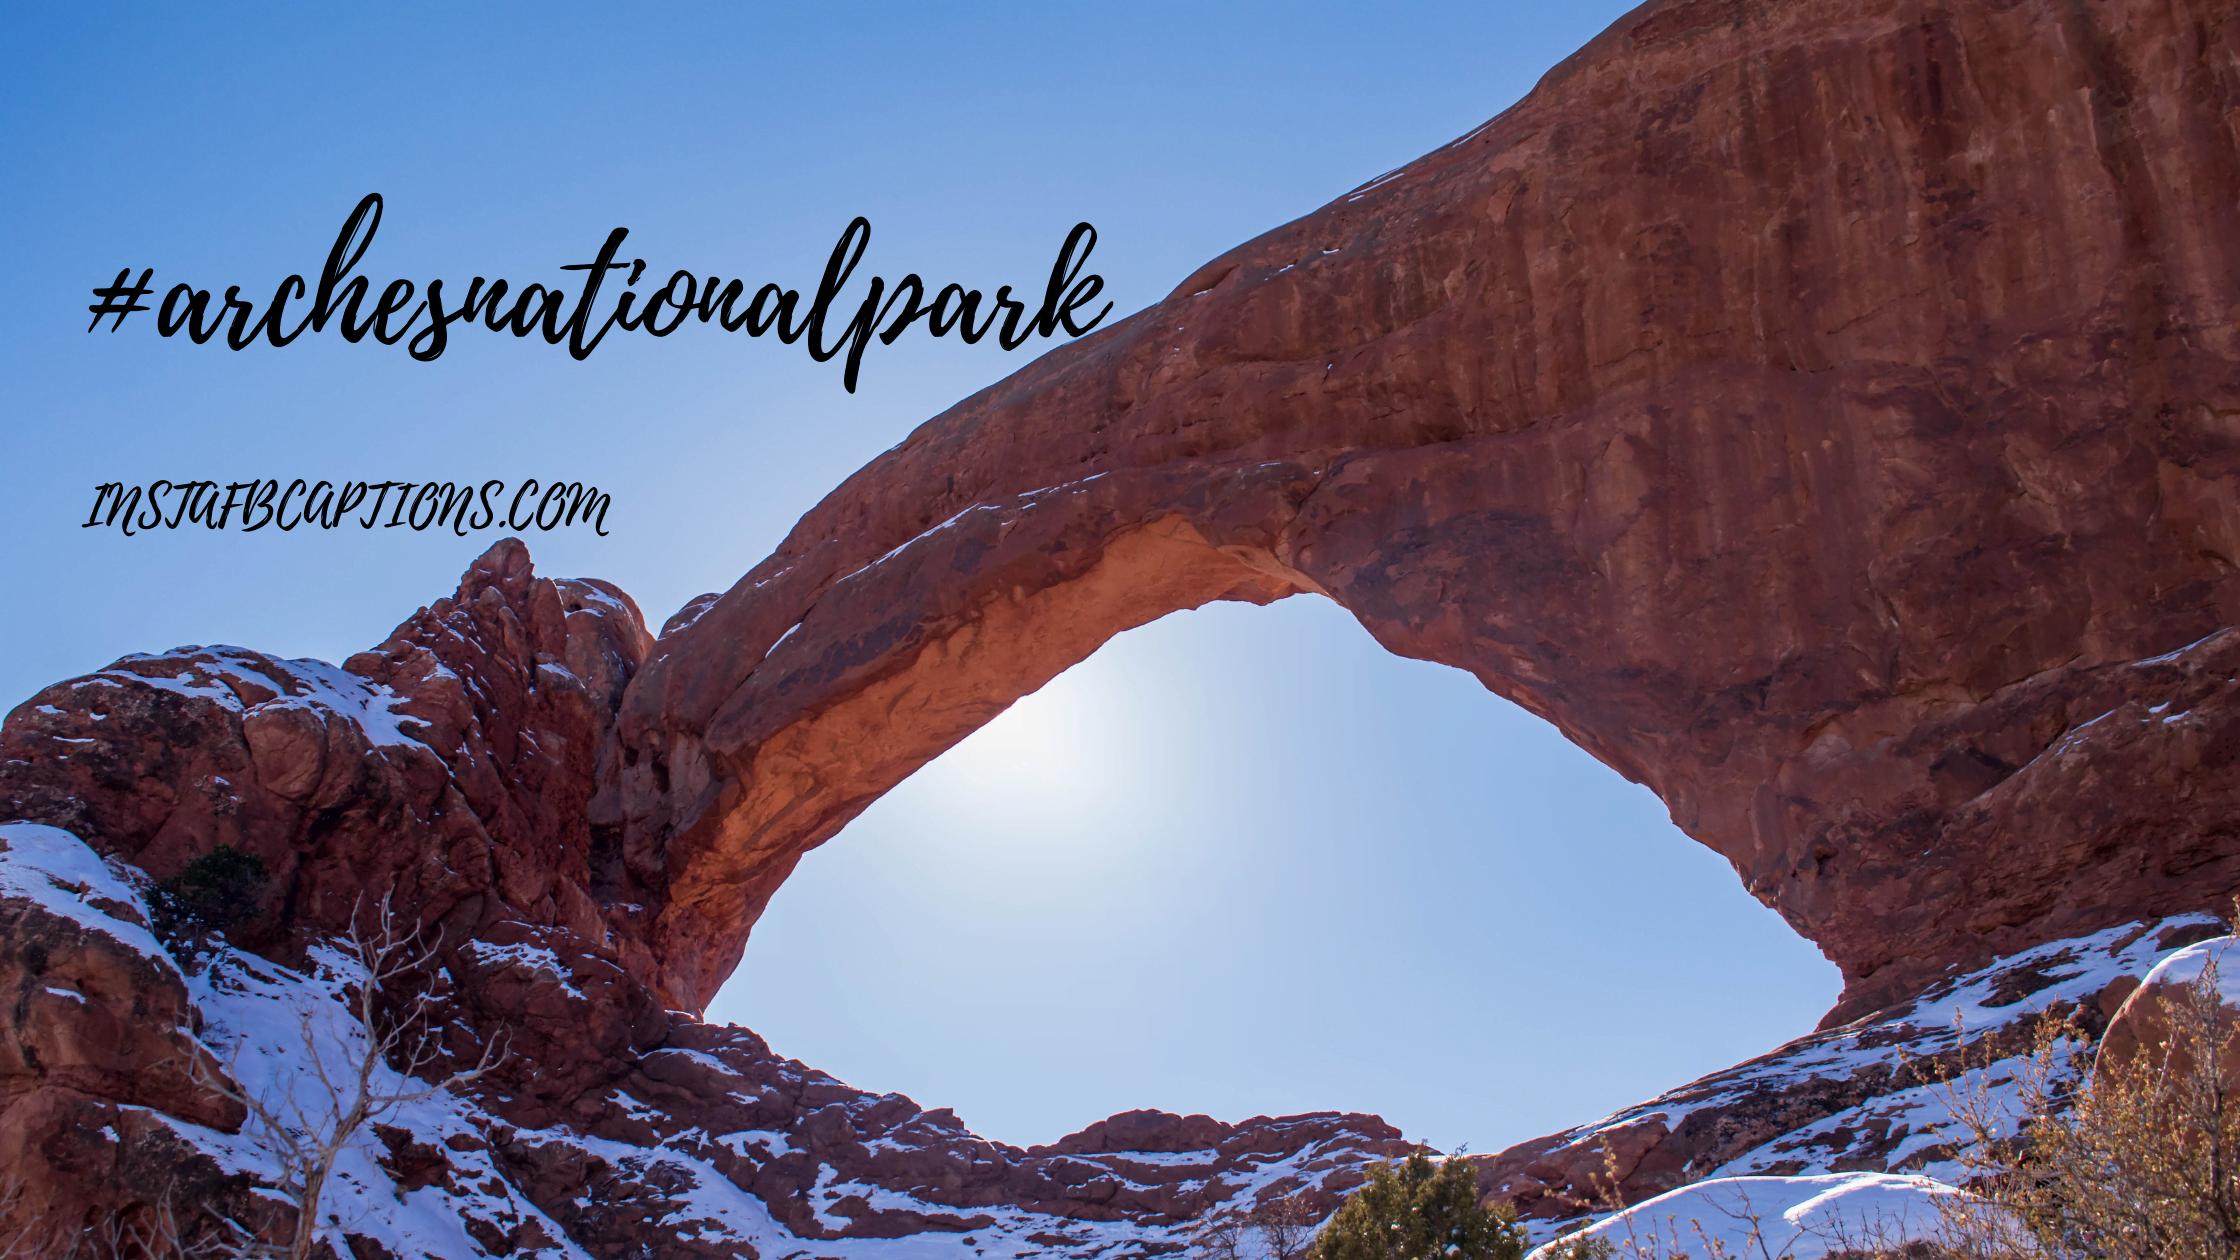 Arches National Park Hashtags  - Arches National Park Hashtags  - 97 Arches National Park Instagram Captions 2022